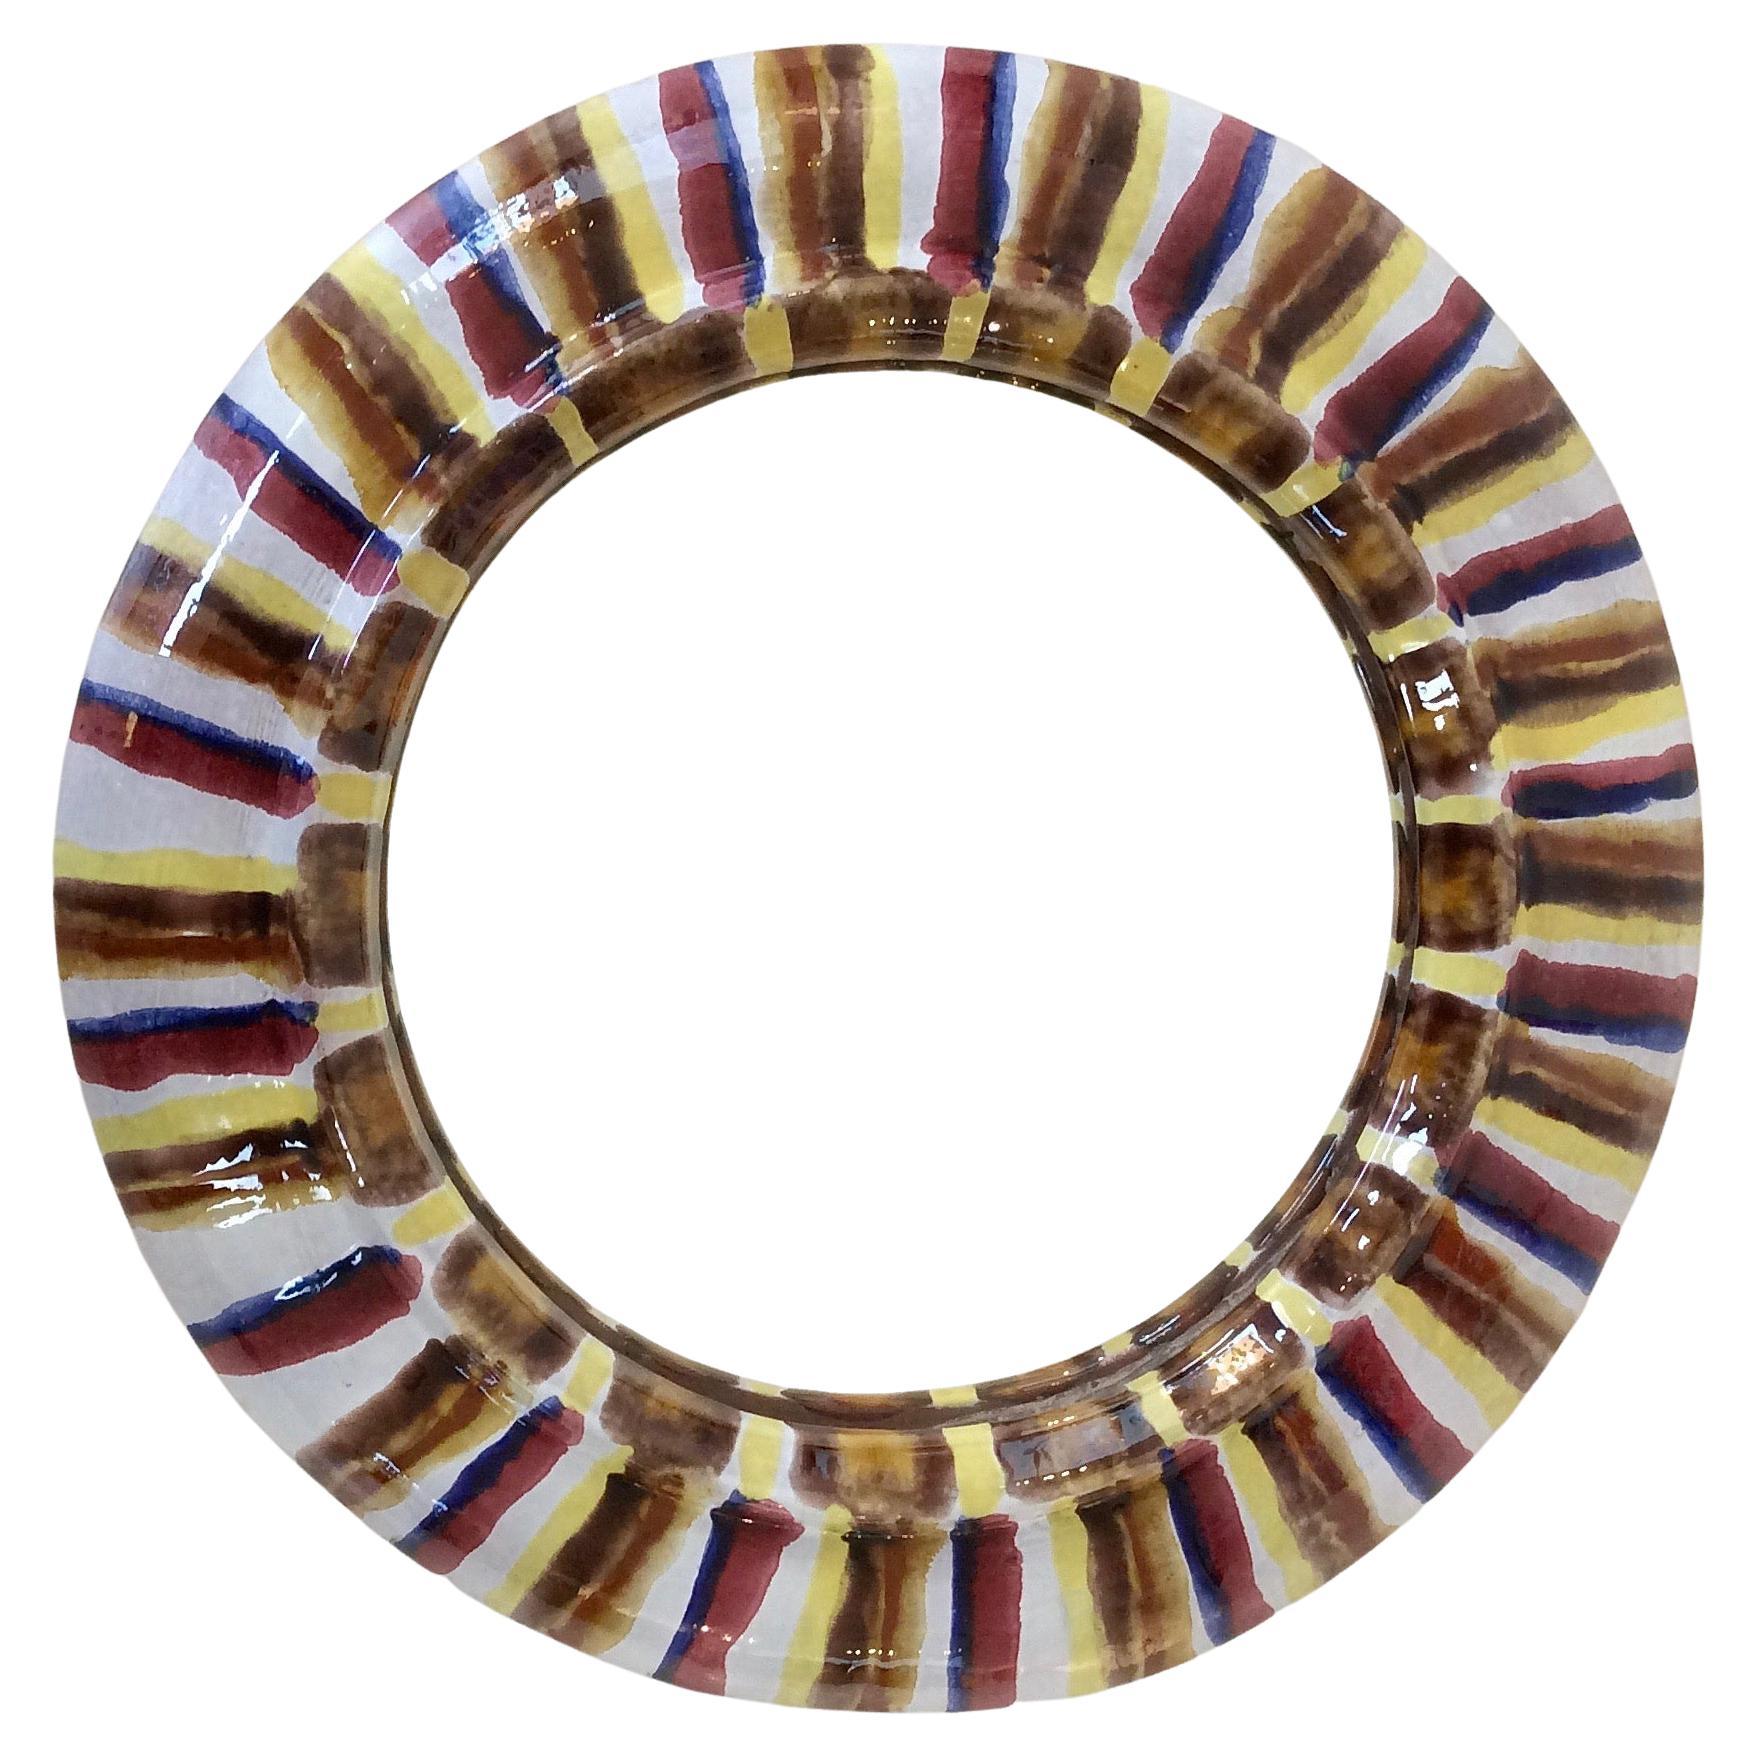 Round wall mirror, circa 1960, France.
White glazed ceramic, multicolor hand-painted stripes.
Dimensions: 28 cm diameter, 3 cm deep.
All purchases are covered by our Buyer Protection Guarantee.
This item can be returned within 7 days of delivery.
We